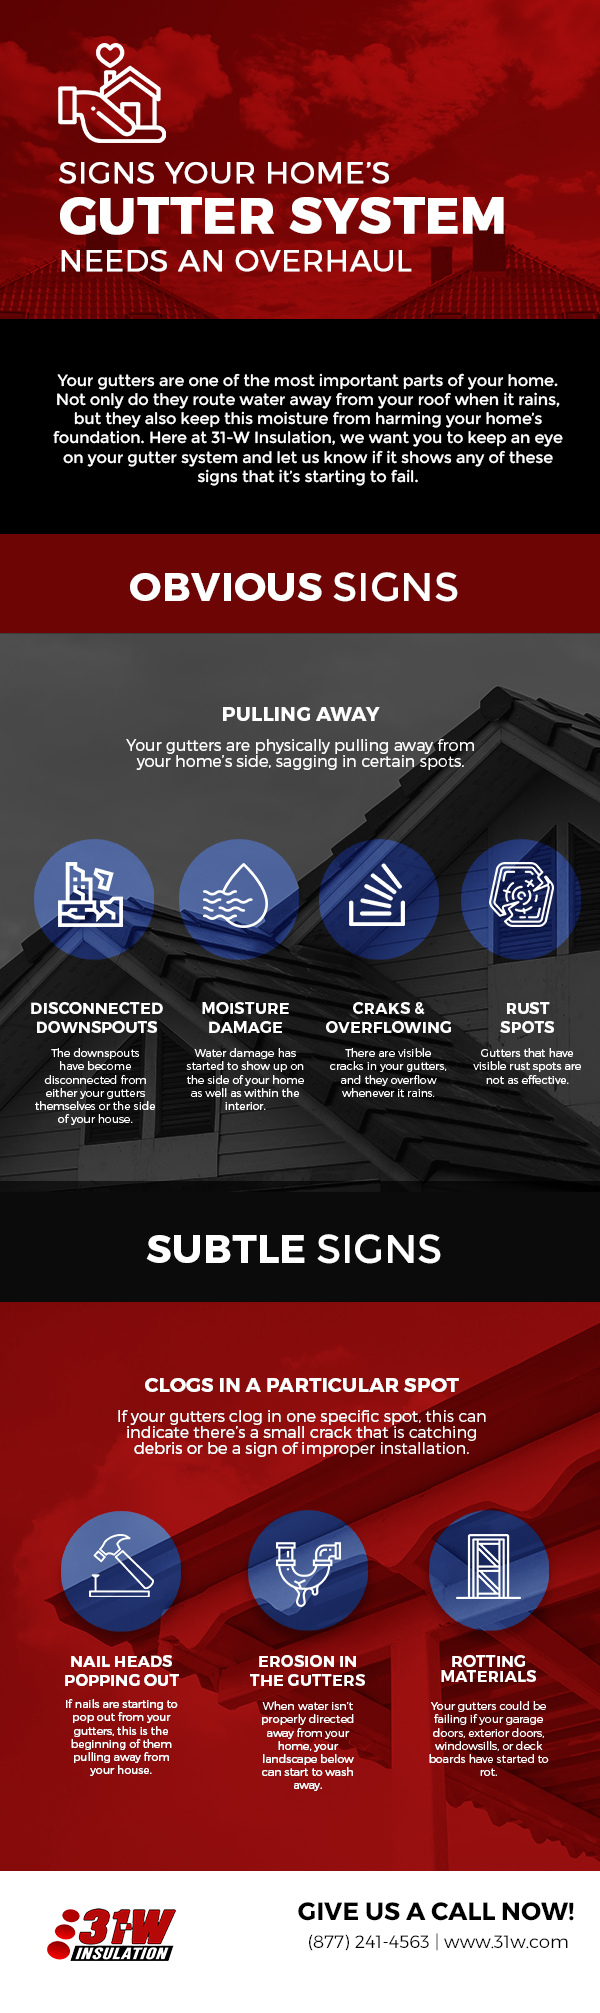 Signs Your Home’s Gutter System Needs an Overhaul [infographic]